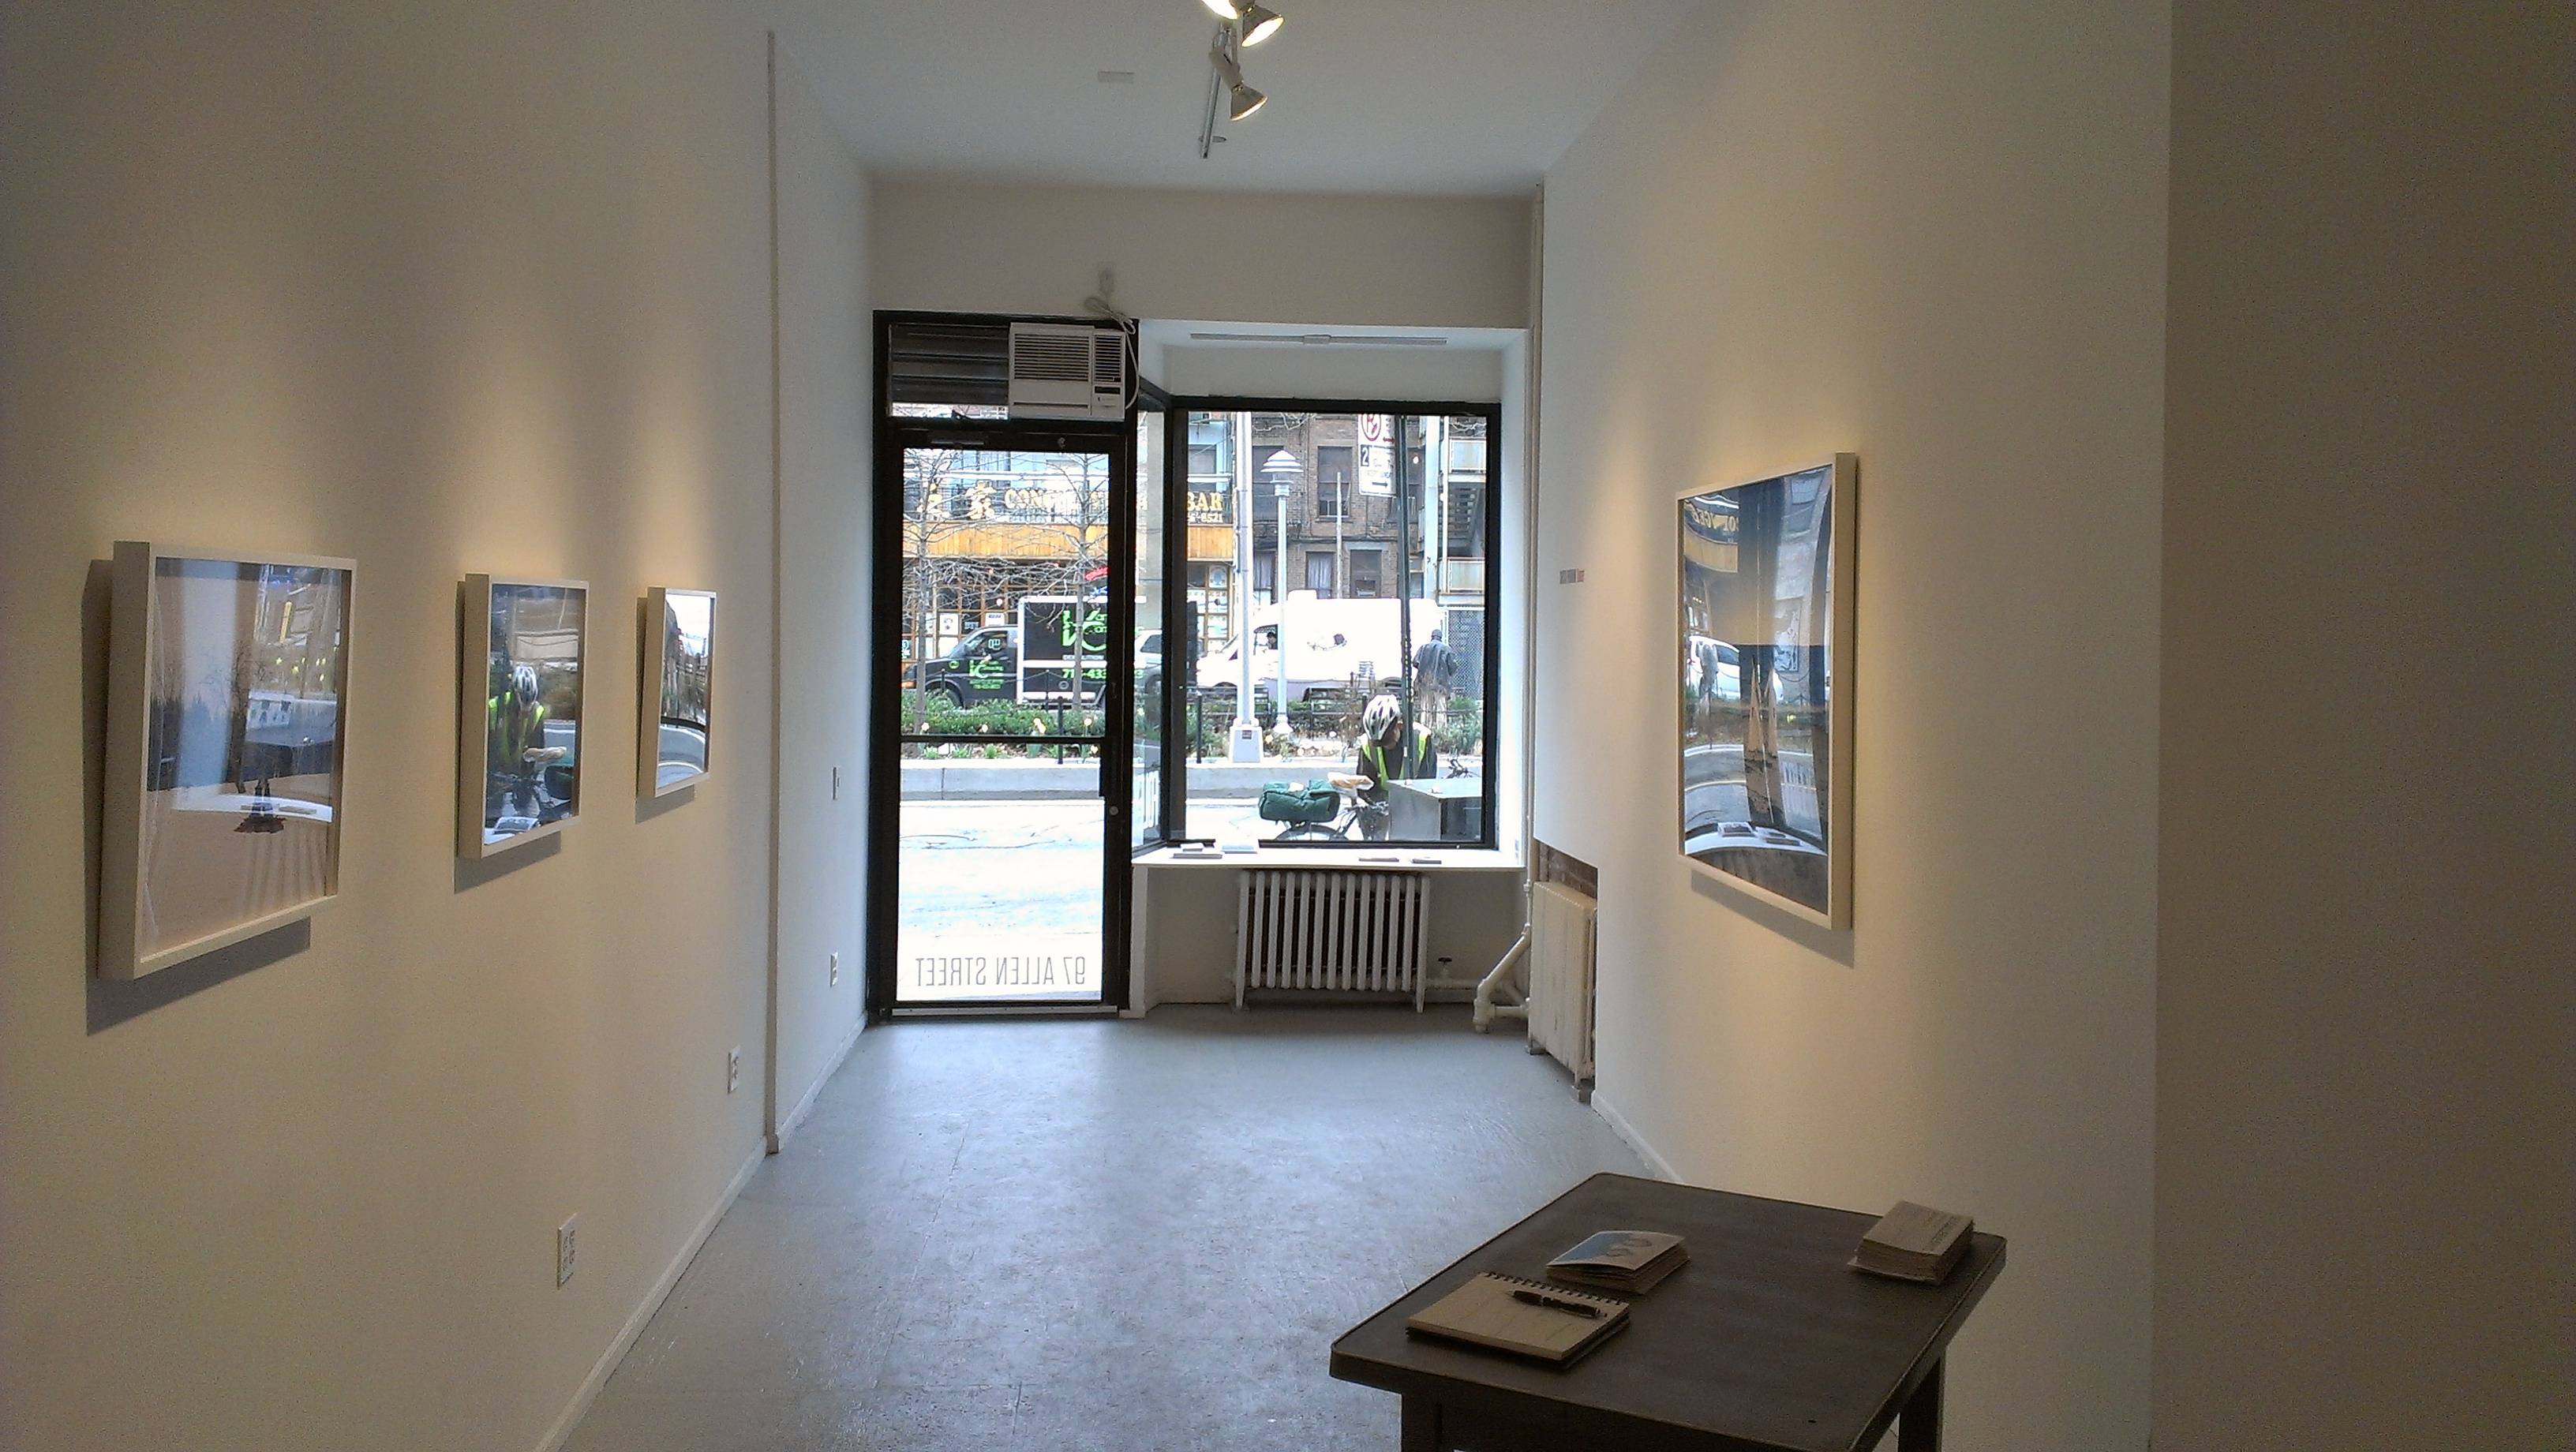 Great Retail Space on Allen Street, Just off DeLancey - Perfect for Gallery or Any Use - Newly Renovated!